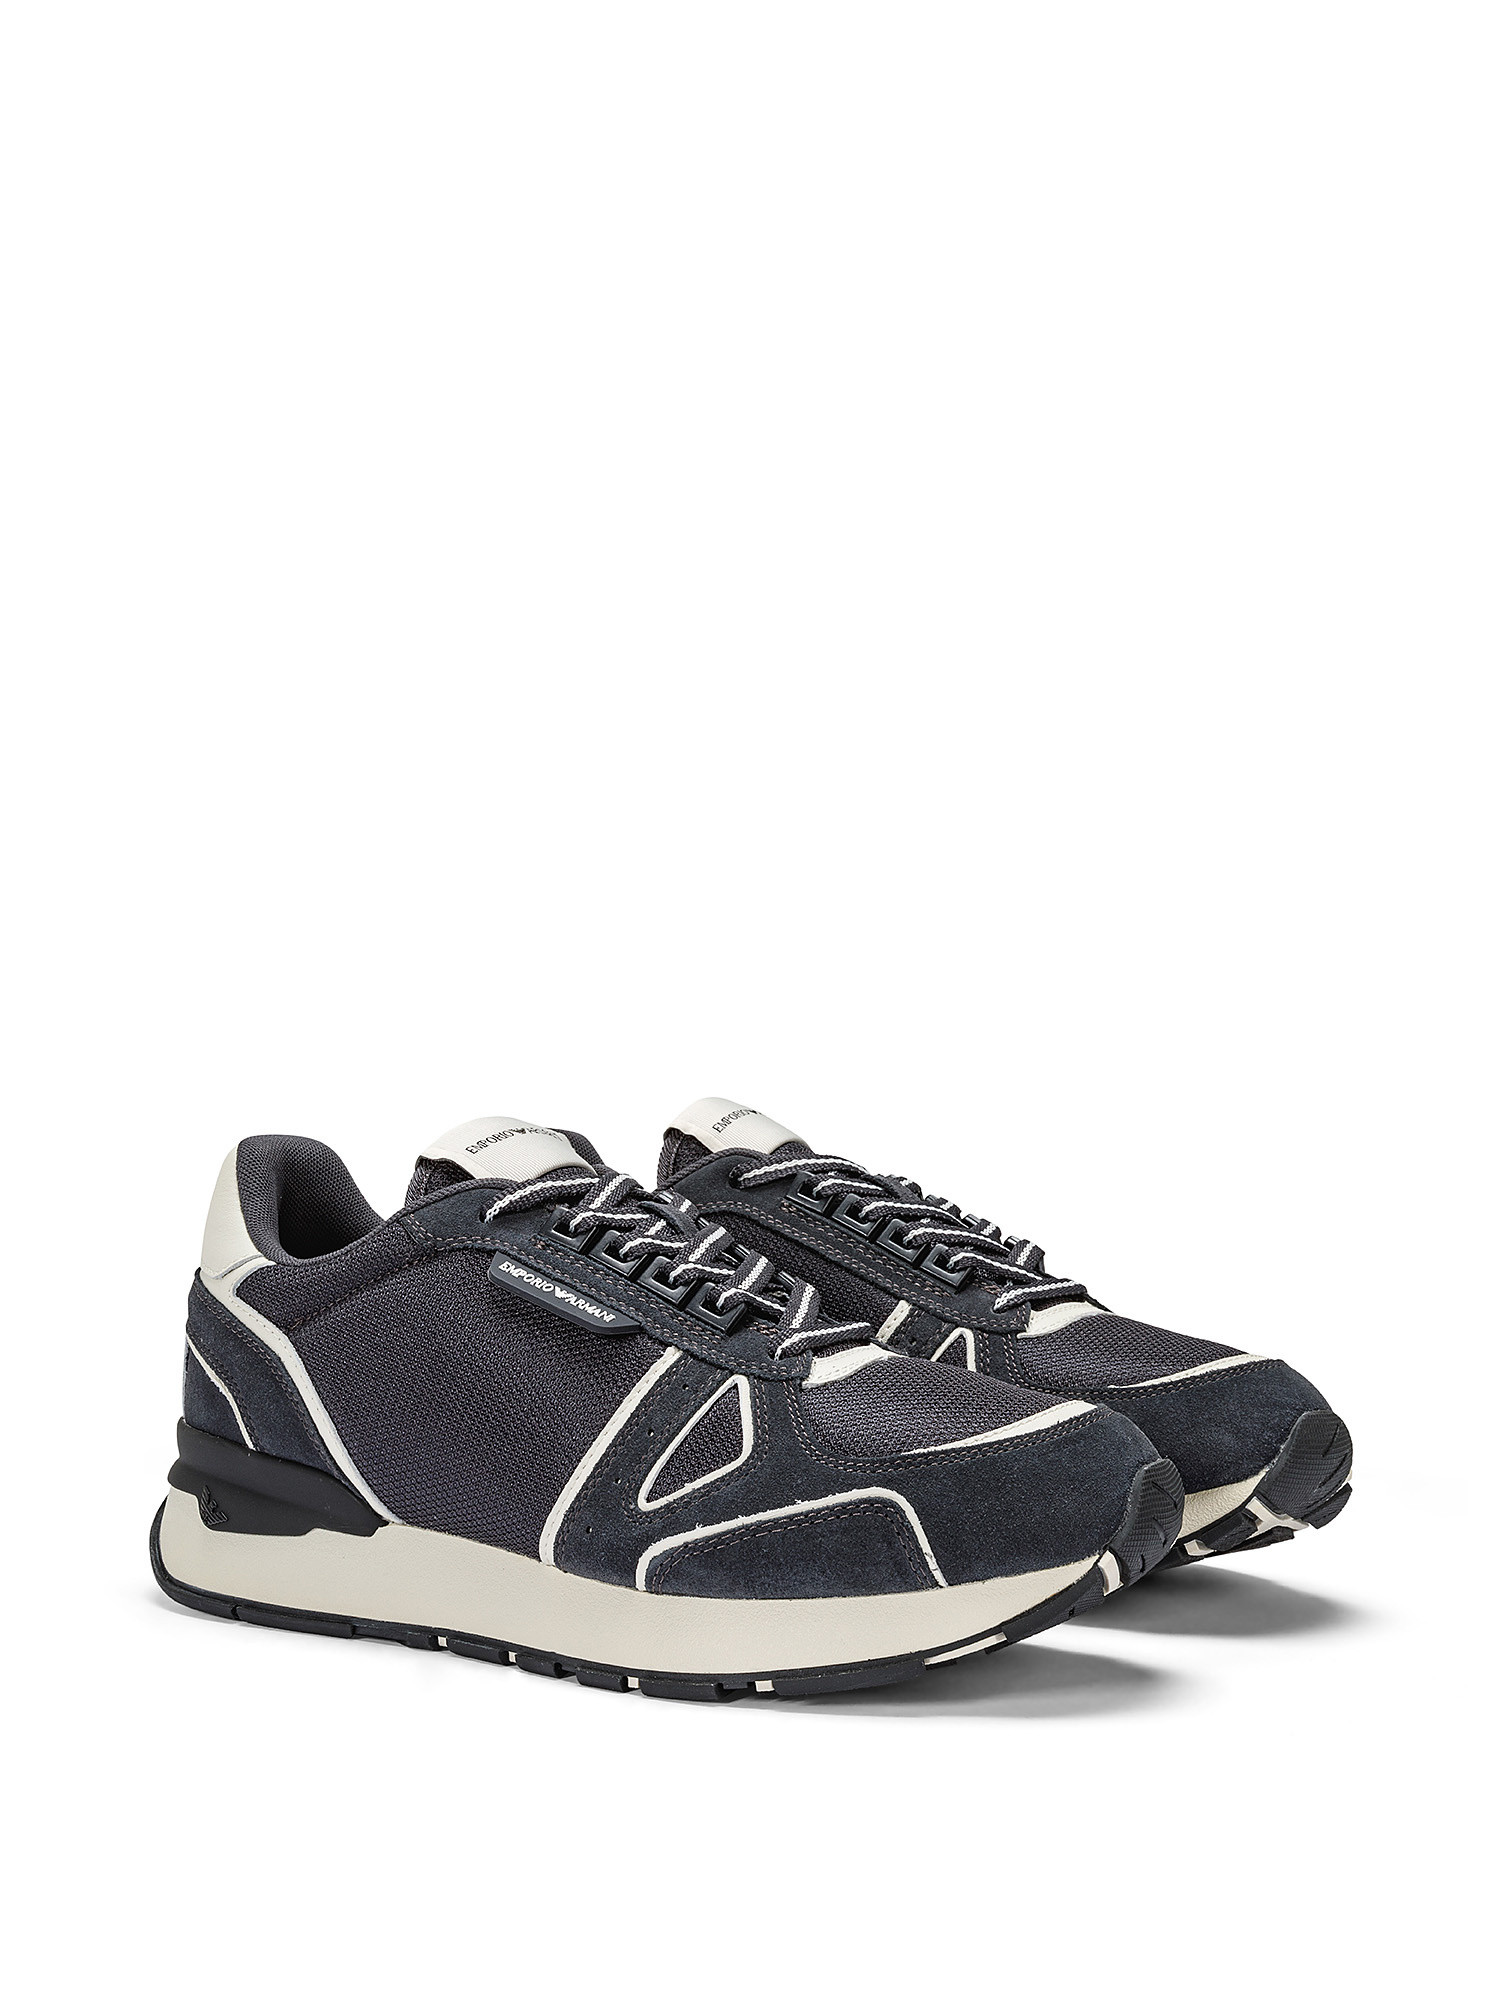 Emporio Armani - Sneakers with suede inserts, Dark Blue, large image number 1